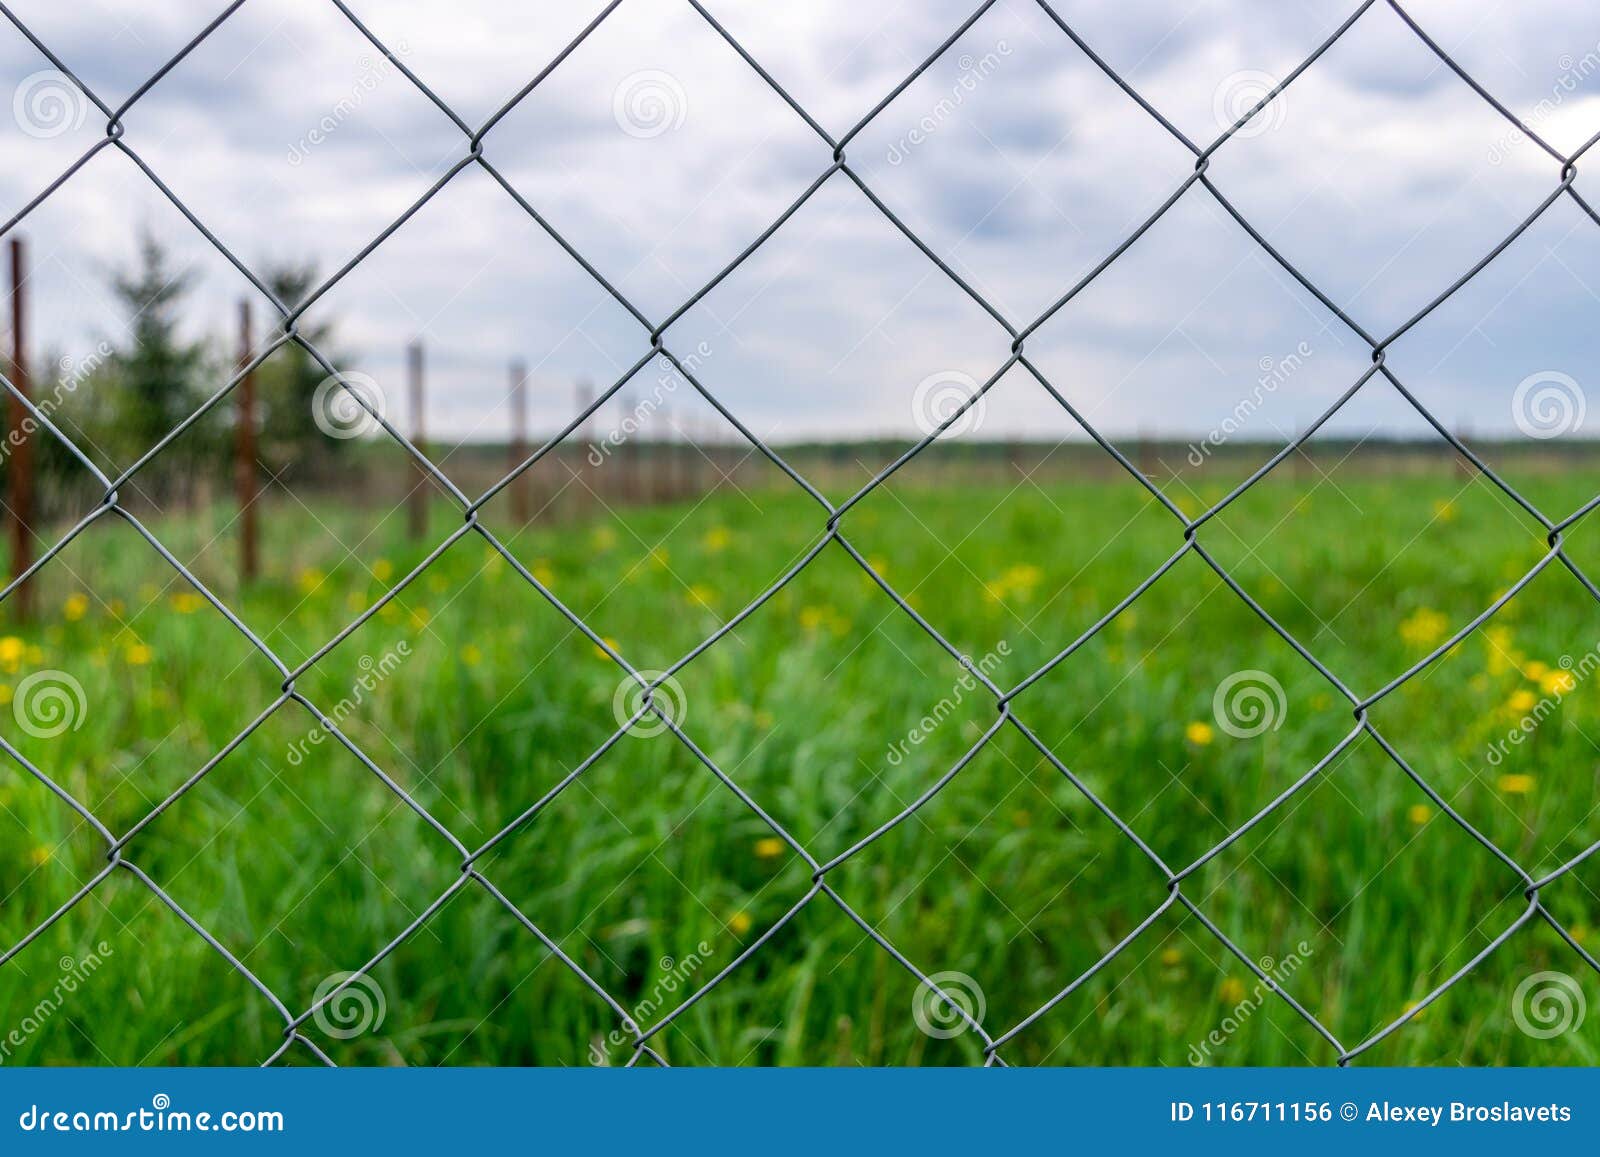 Wire mesh fence Rabitz net stock photo. Image of material - 116711156
